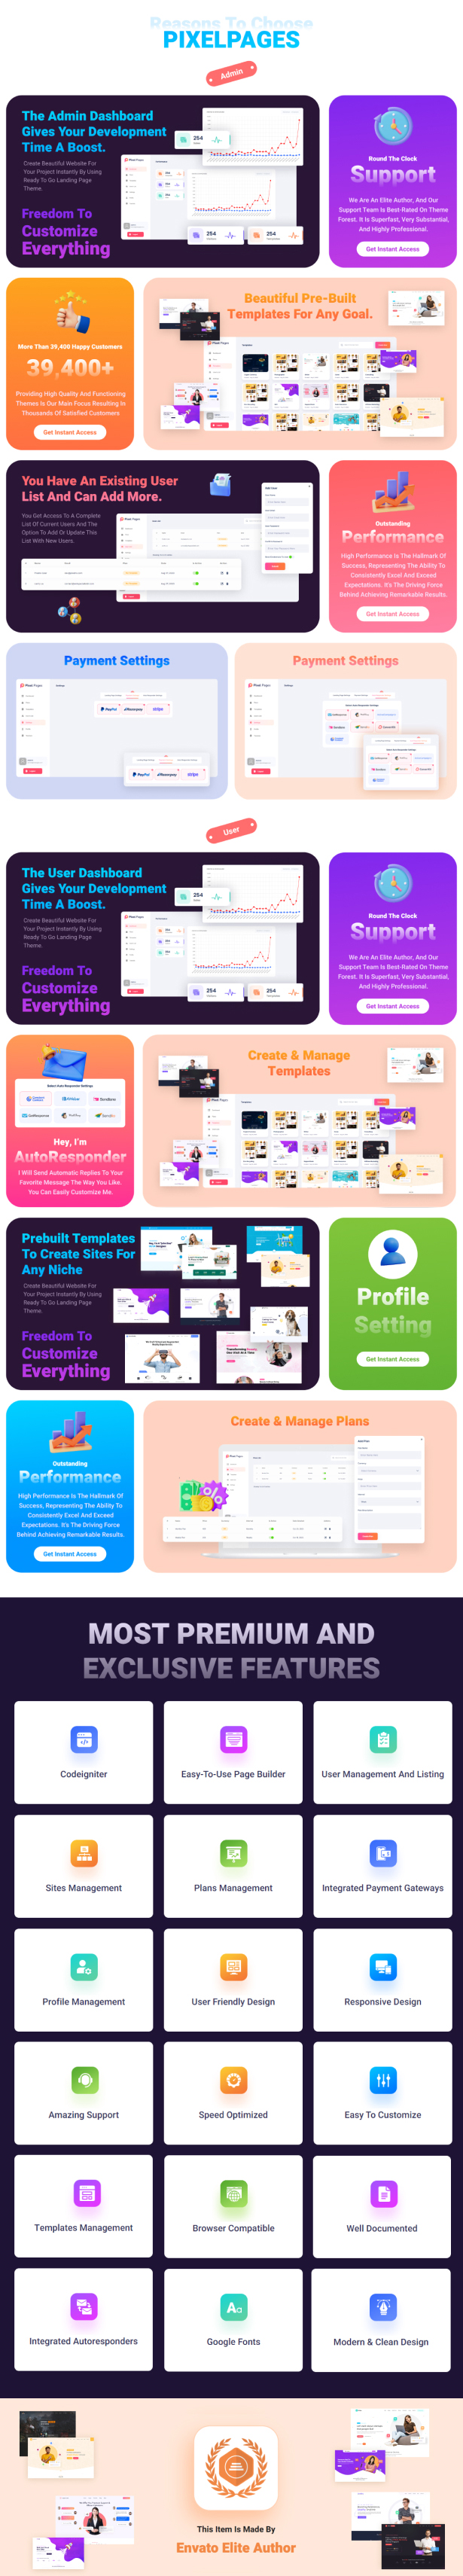 PixelPages - SAAS Application Website Builder for HTML Template - 3